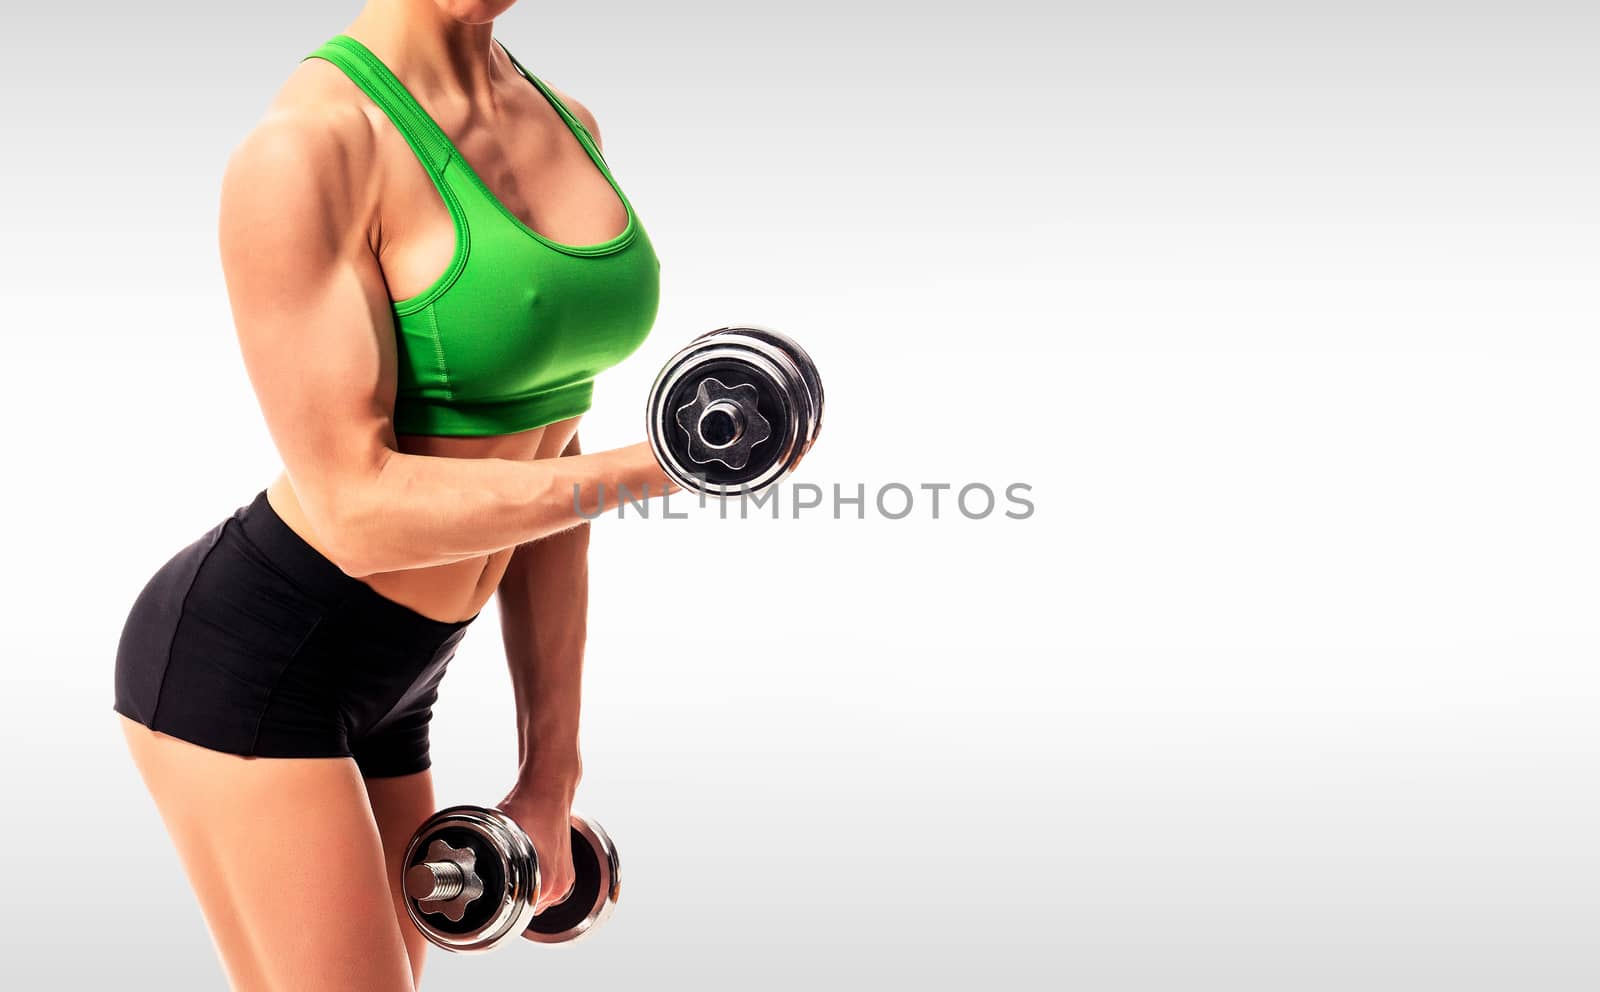 fitness woman with barbells on grey background